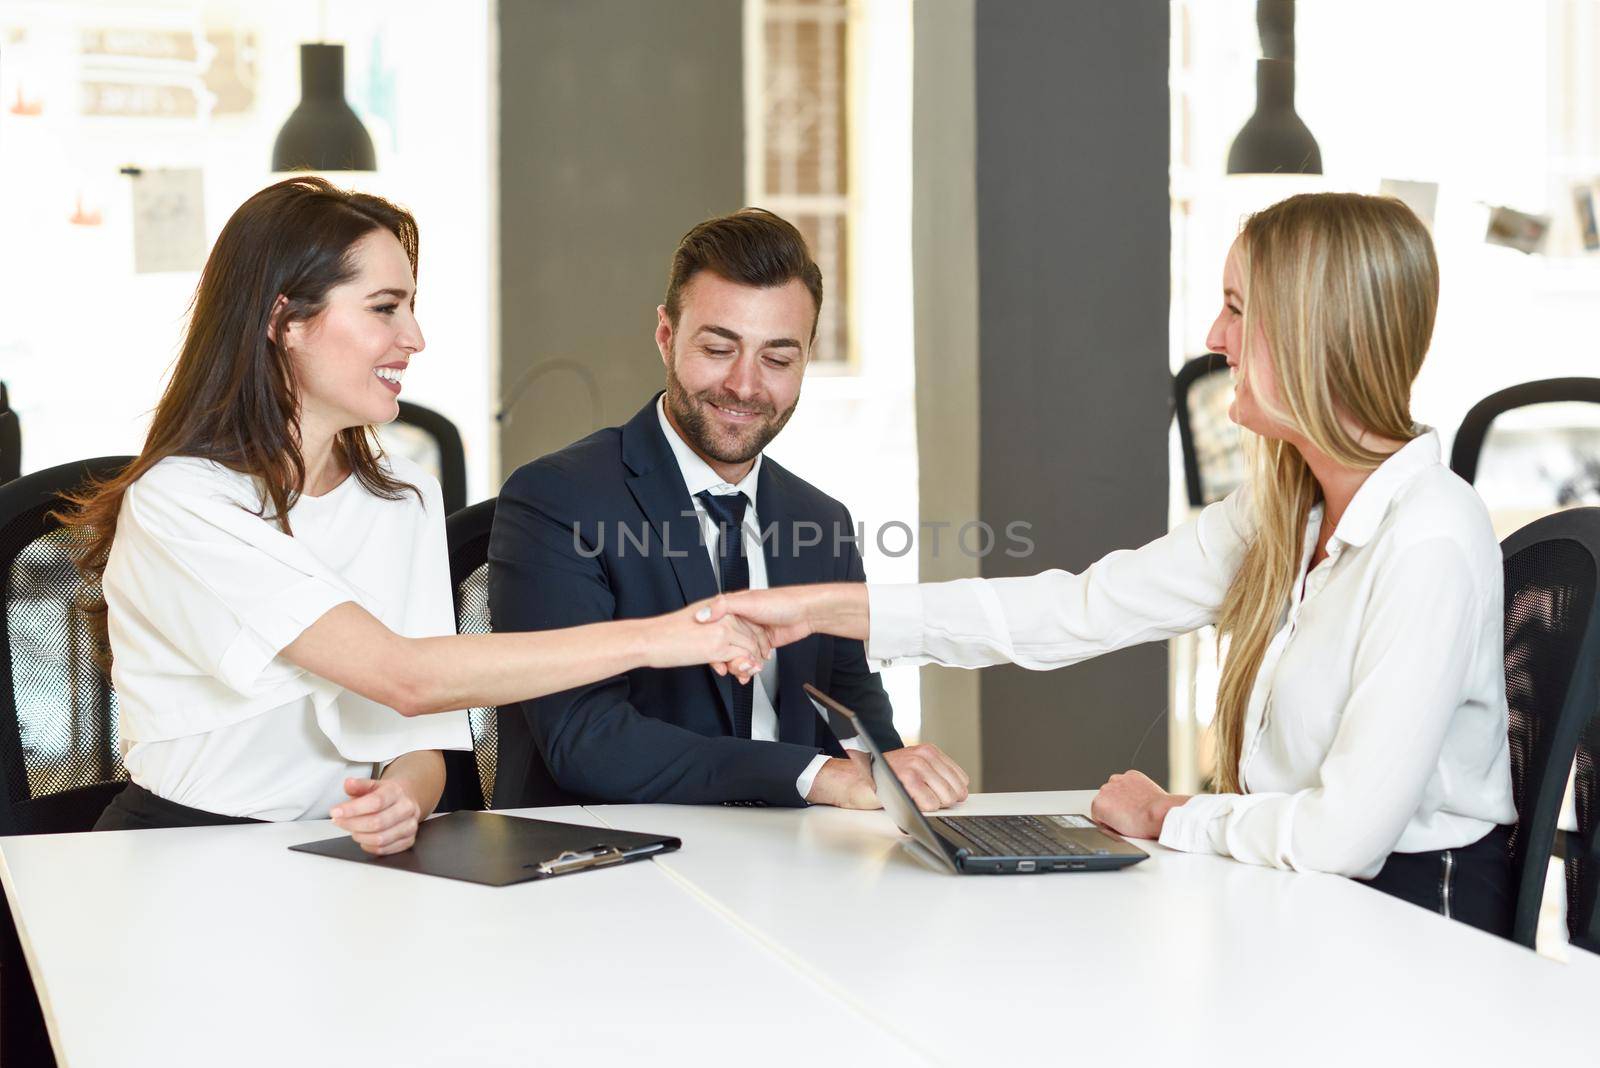 Smiling young couple shaking hands with an insurance agent or investment adviser. Three people meeting in an office reaching an agreement